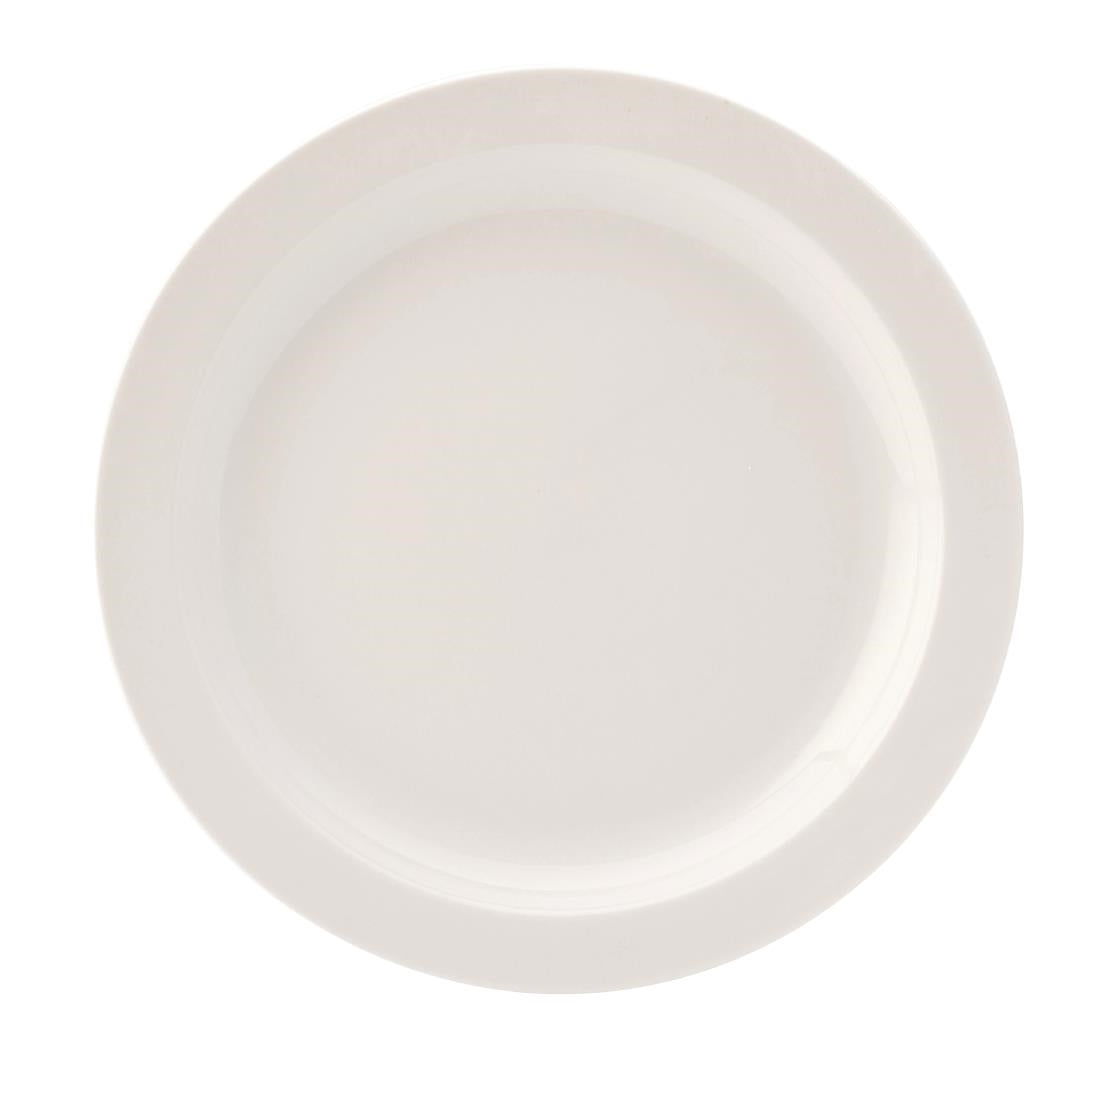 DB611 Utopia Pure White Narrow Rim Plates 230mm (Pack of 24) JD Catering Equipment Solutions Ltd